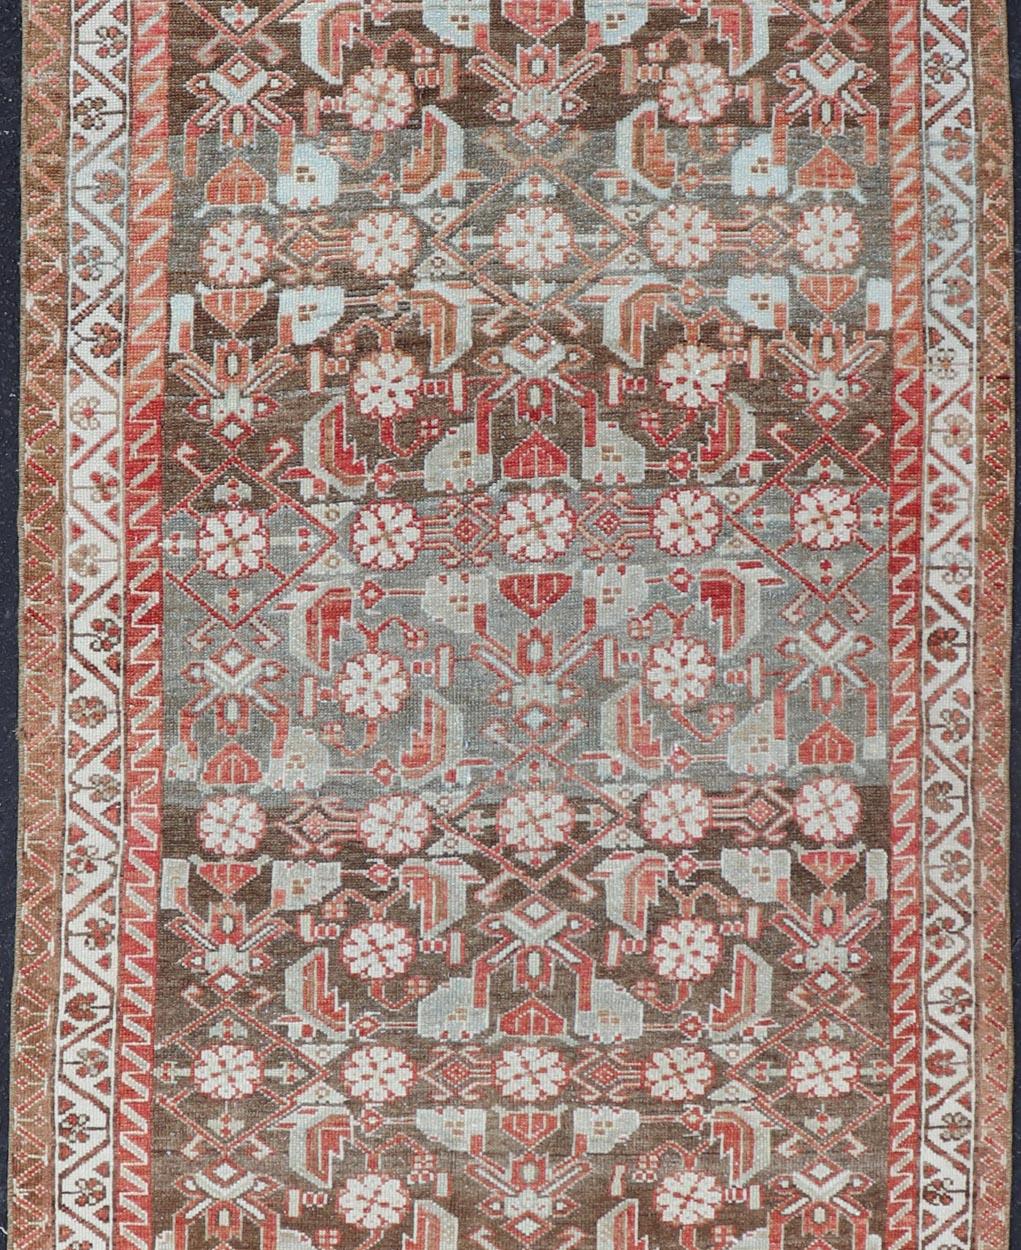 This antique Persian Malayer Runner features a sub-geometric floral design with a complementary multi-tiered border. The runner is rendered in red and earthy tones making this rug a perfect fit for a variety of classic, traditional and transitional